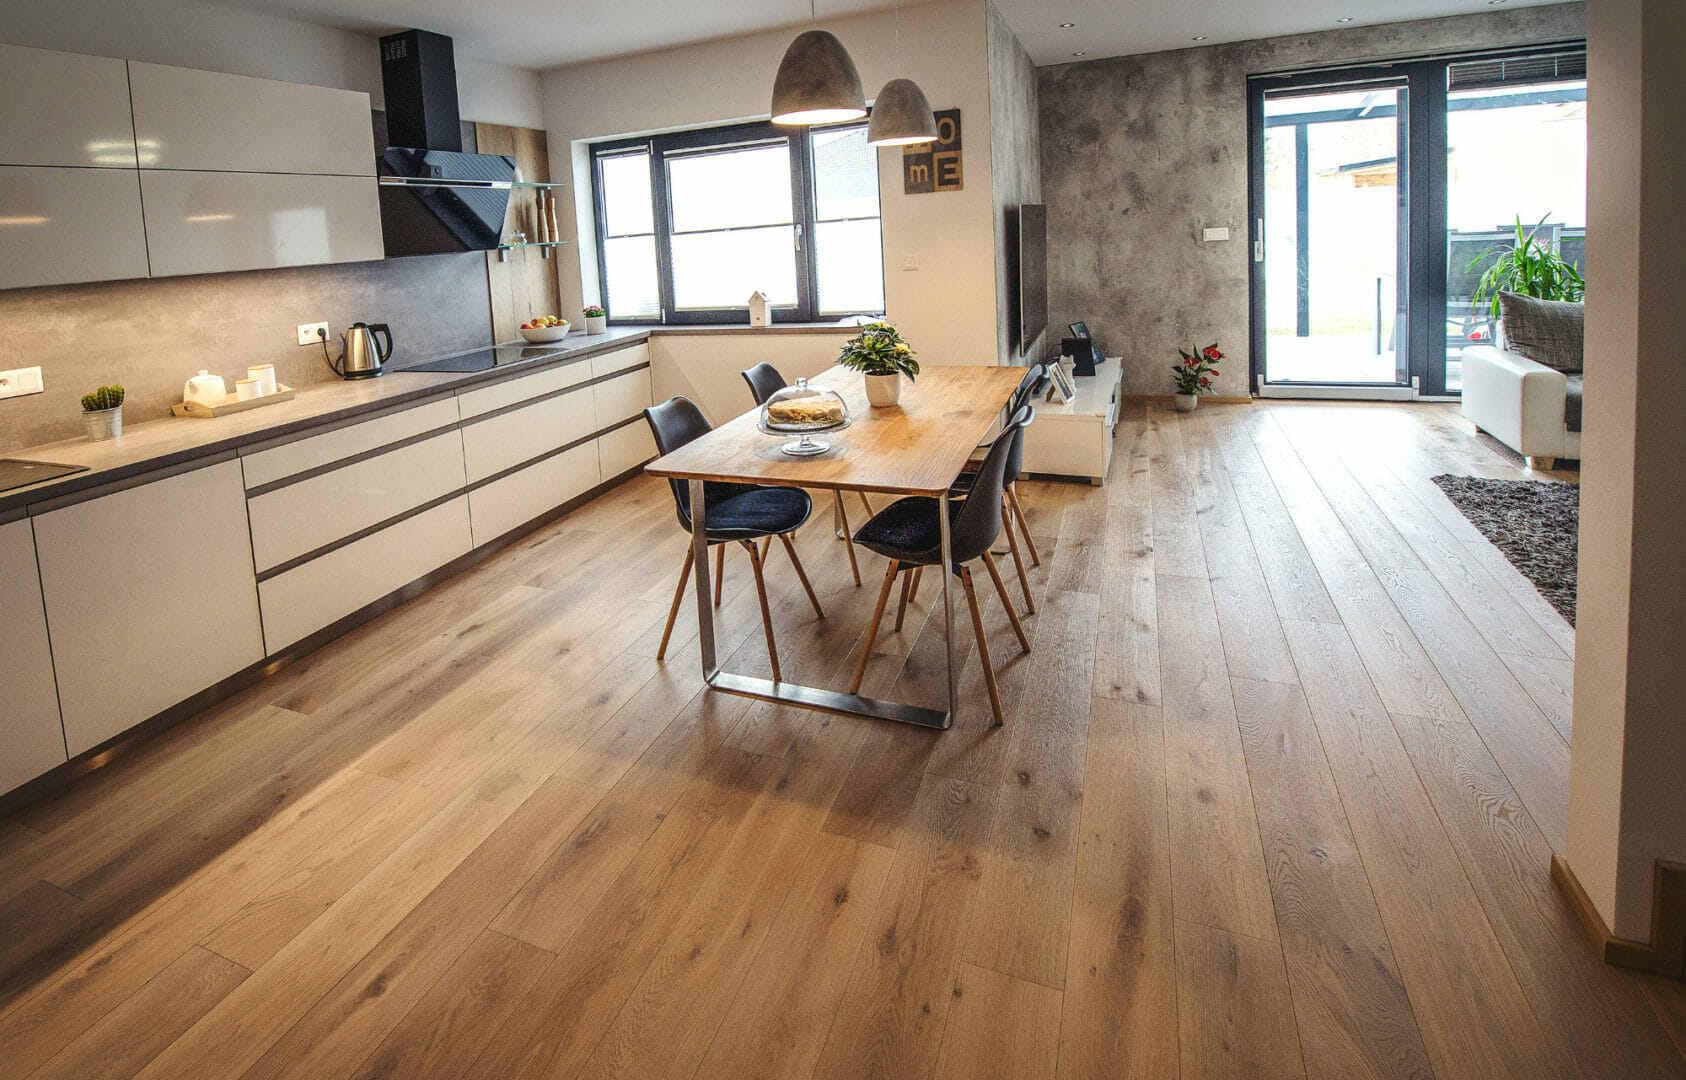 CHOOSING THE RIGHT SUSTAINABLE WOOD FINISH